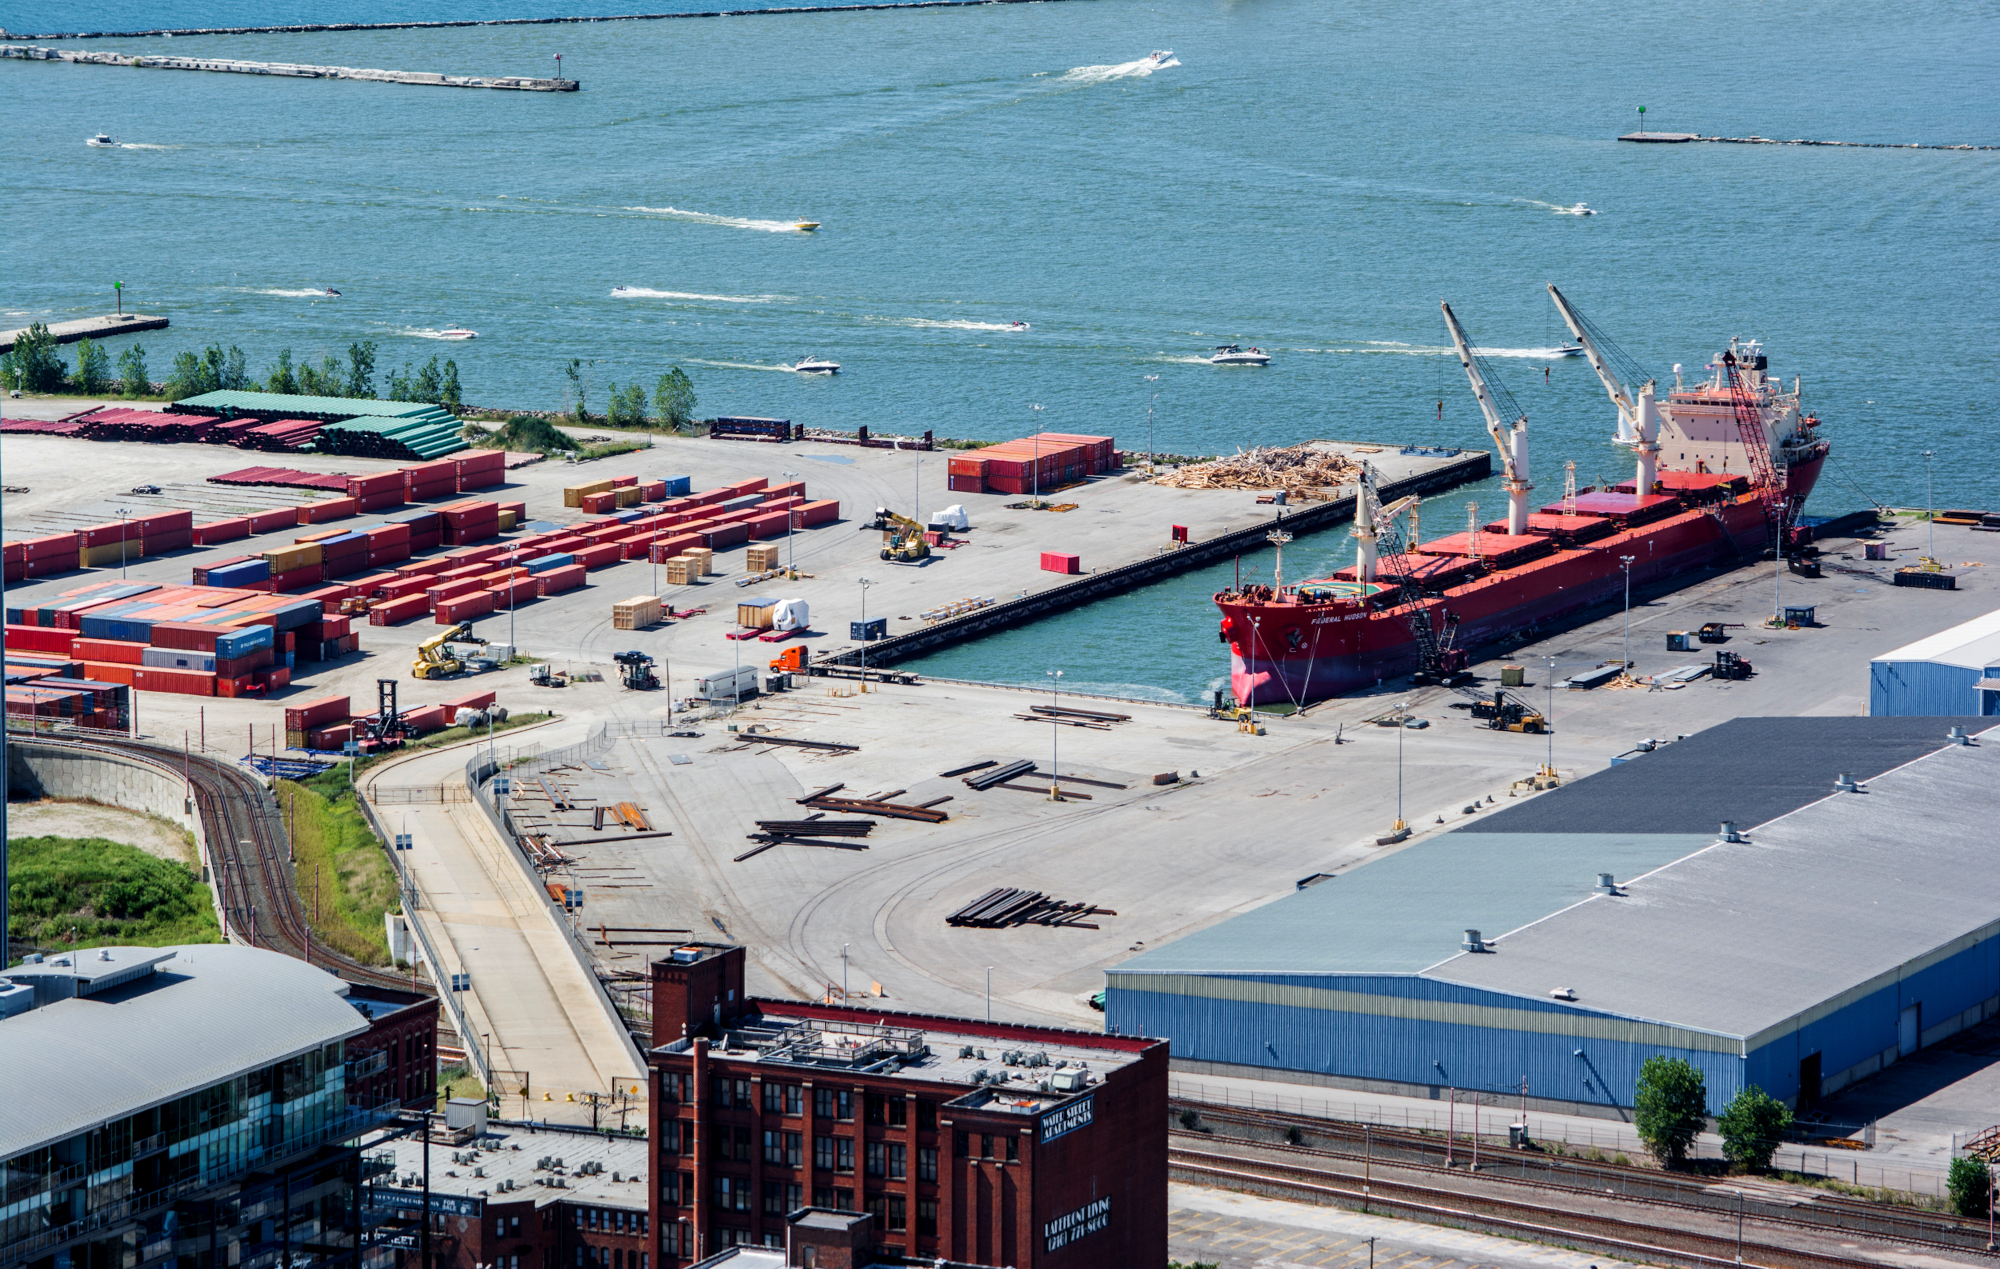 Overhead view of the Port of Cleveland, showing a docked ship and shipping containers and other materials on the dock.